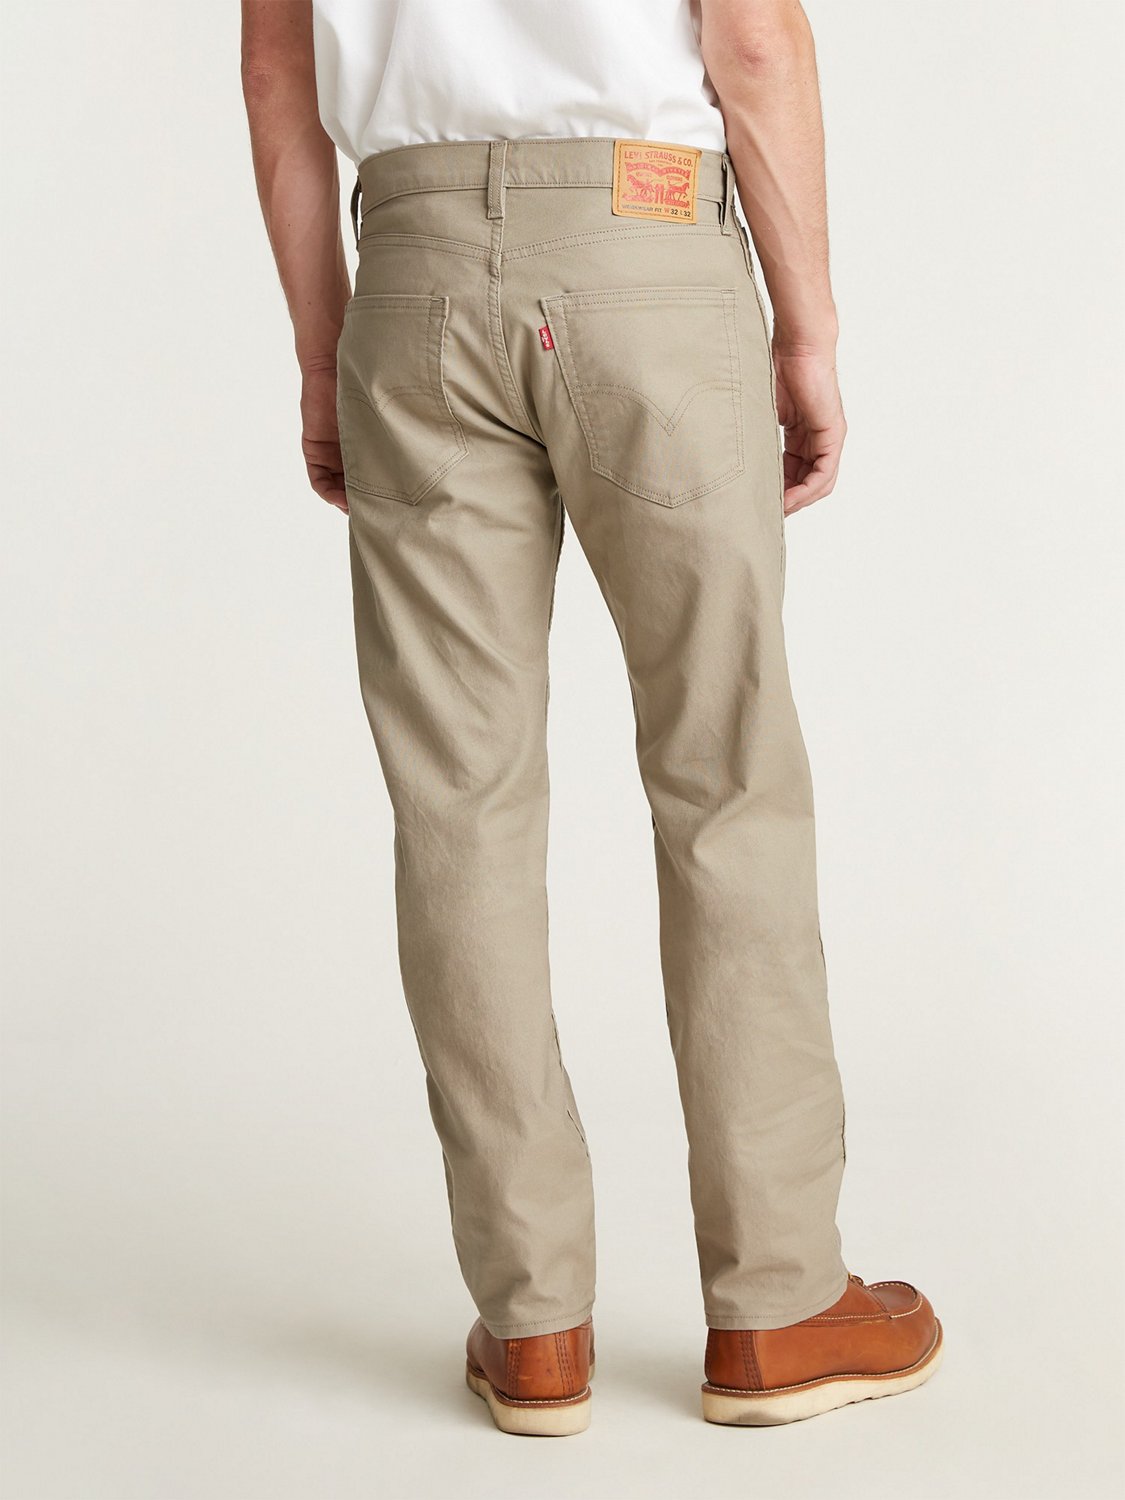 Levi's Men's Workwear Jeans | Free Shipping at Academy